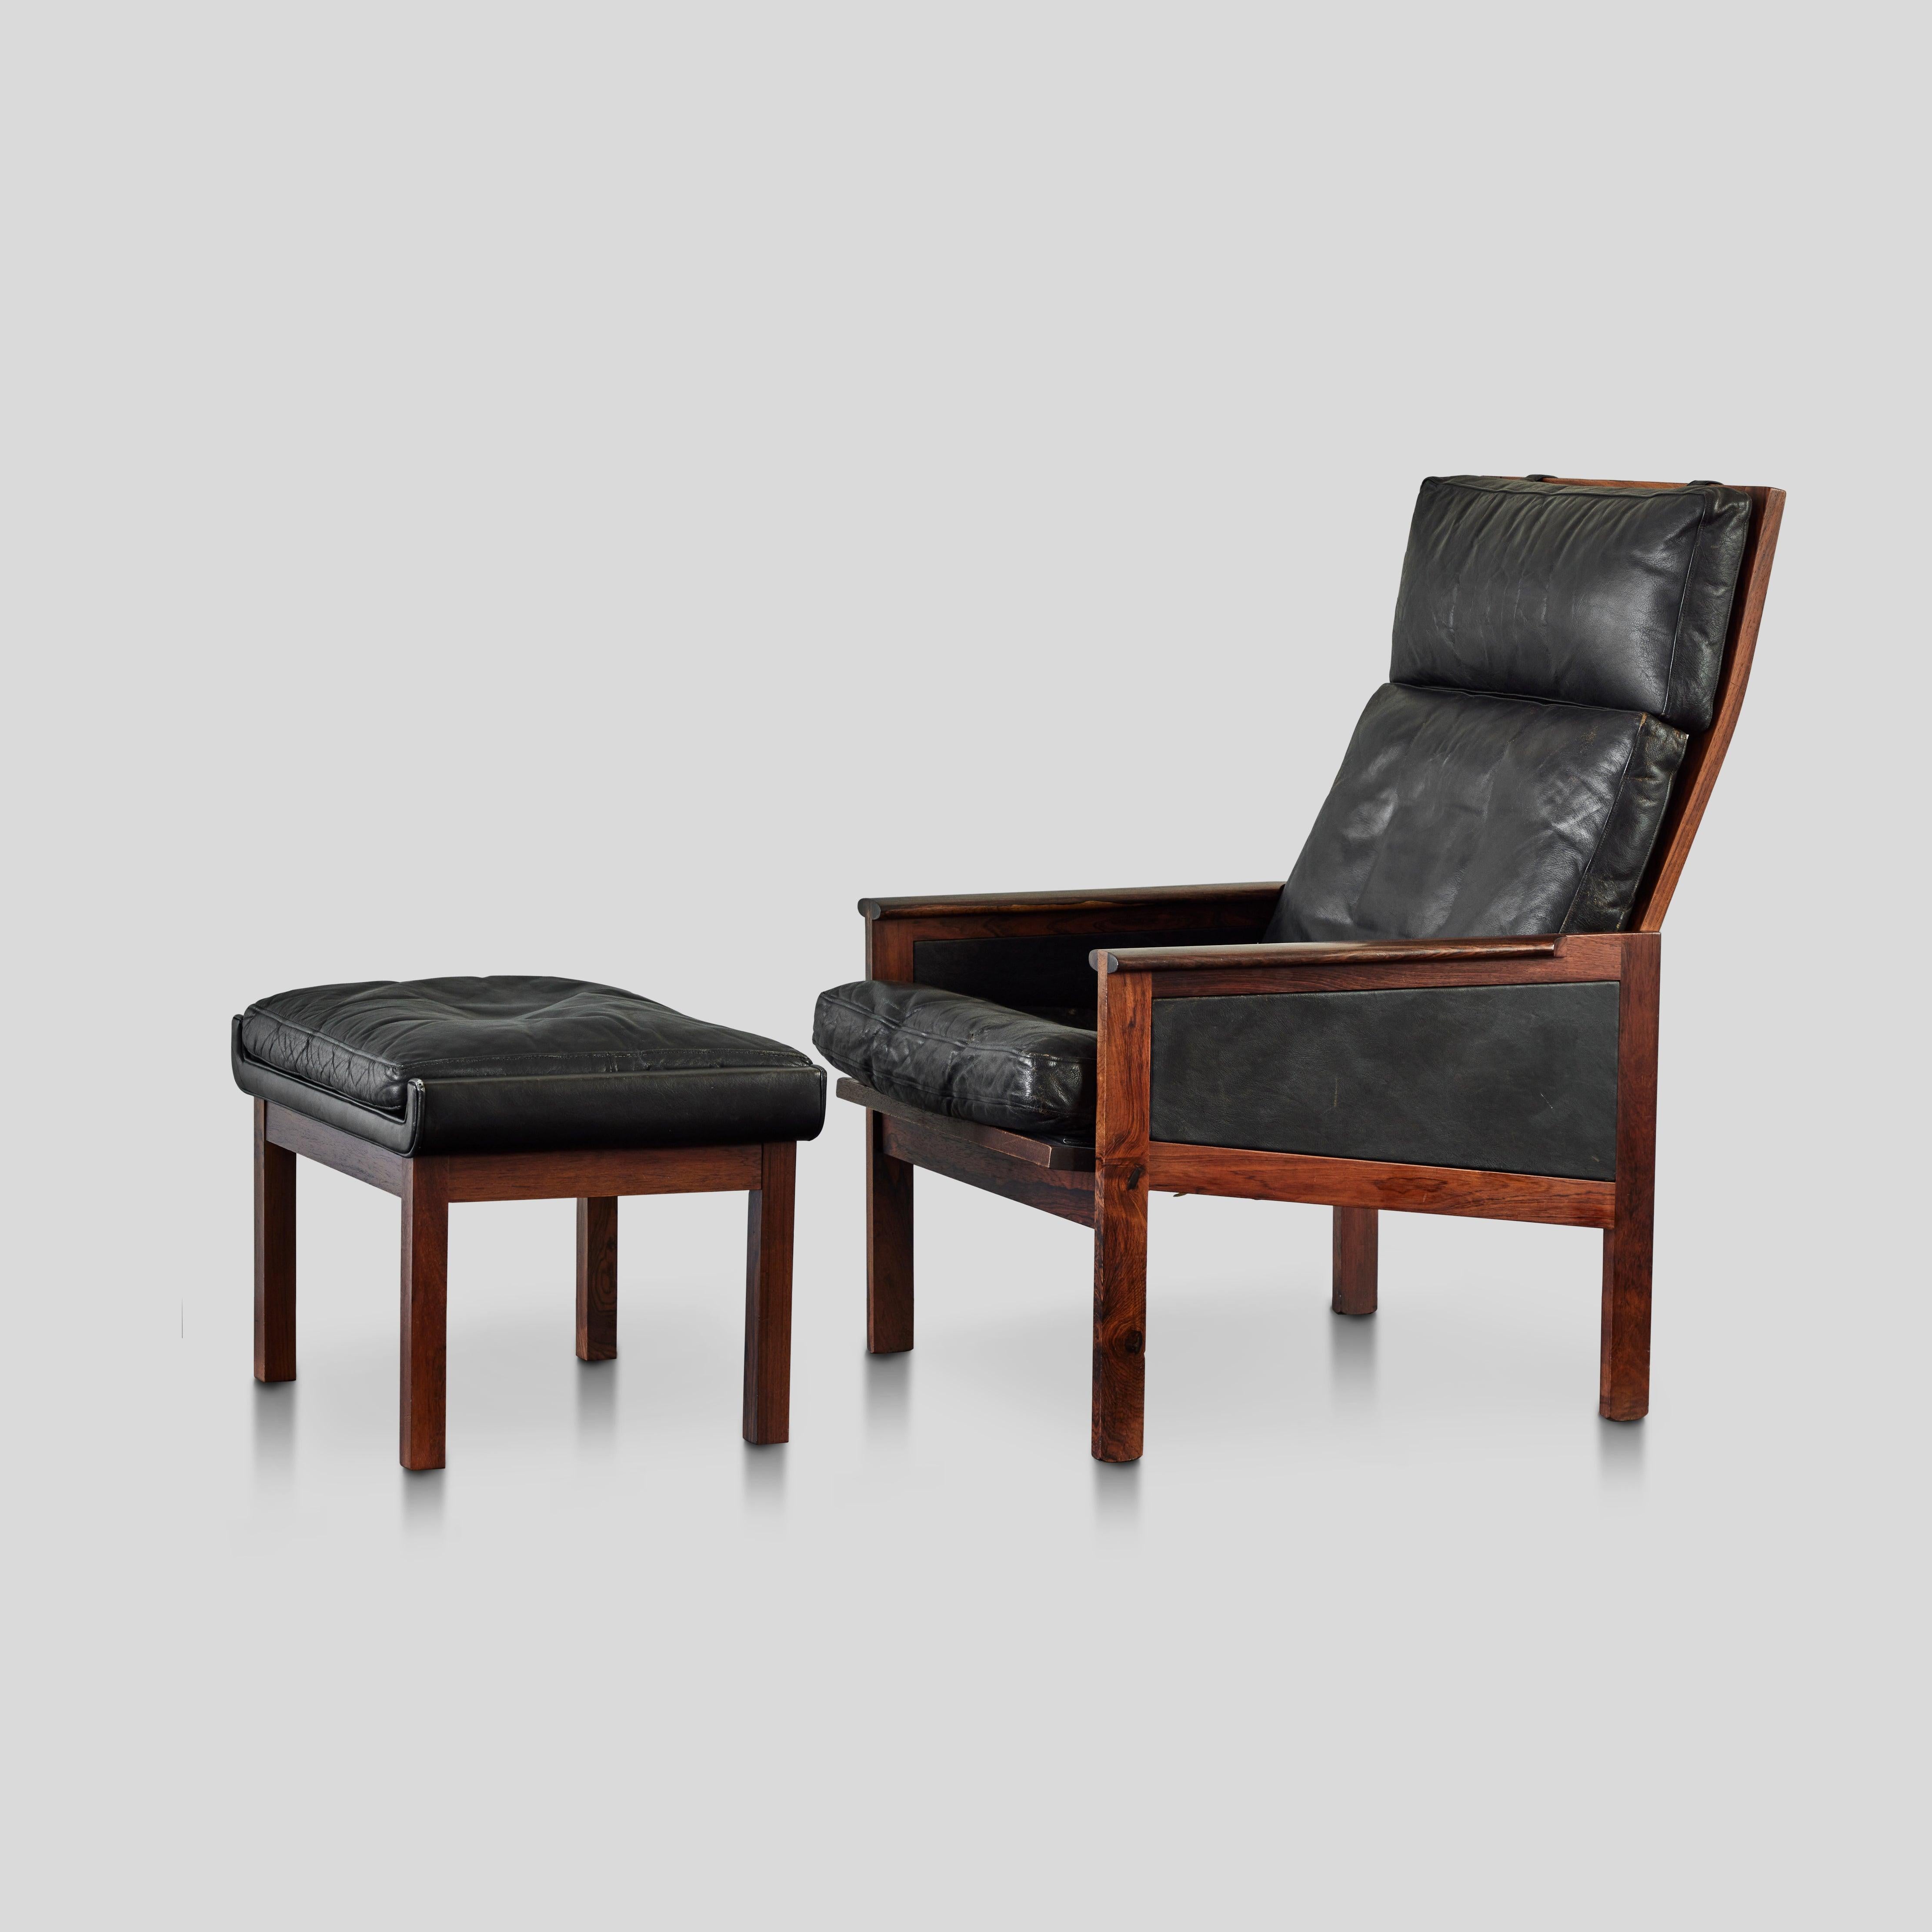 20th Century Suite of Danish Midcentury Leather Chairs with Ottoman